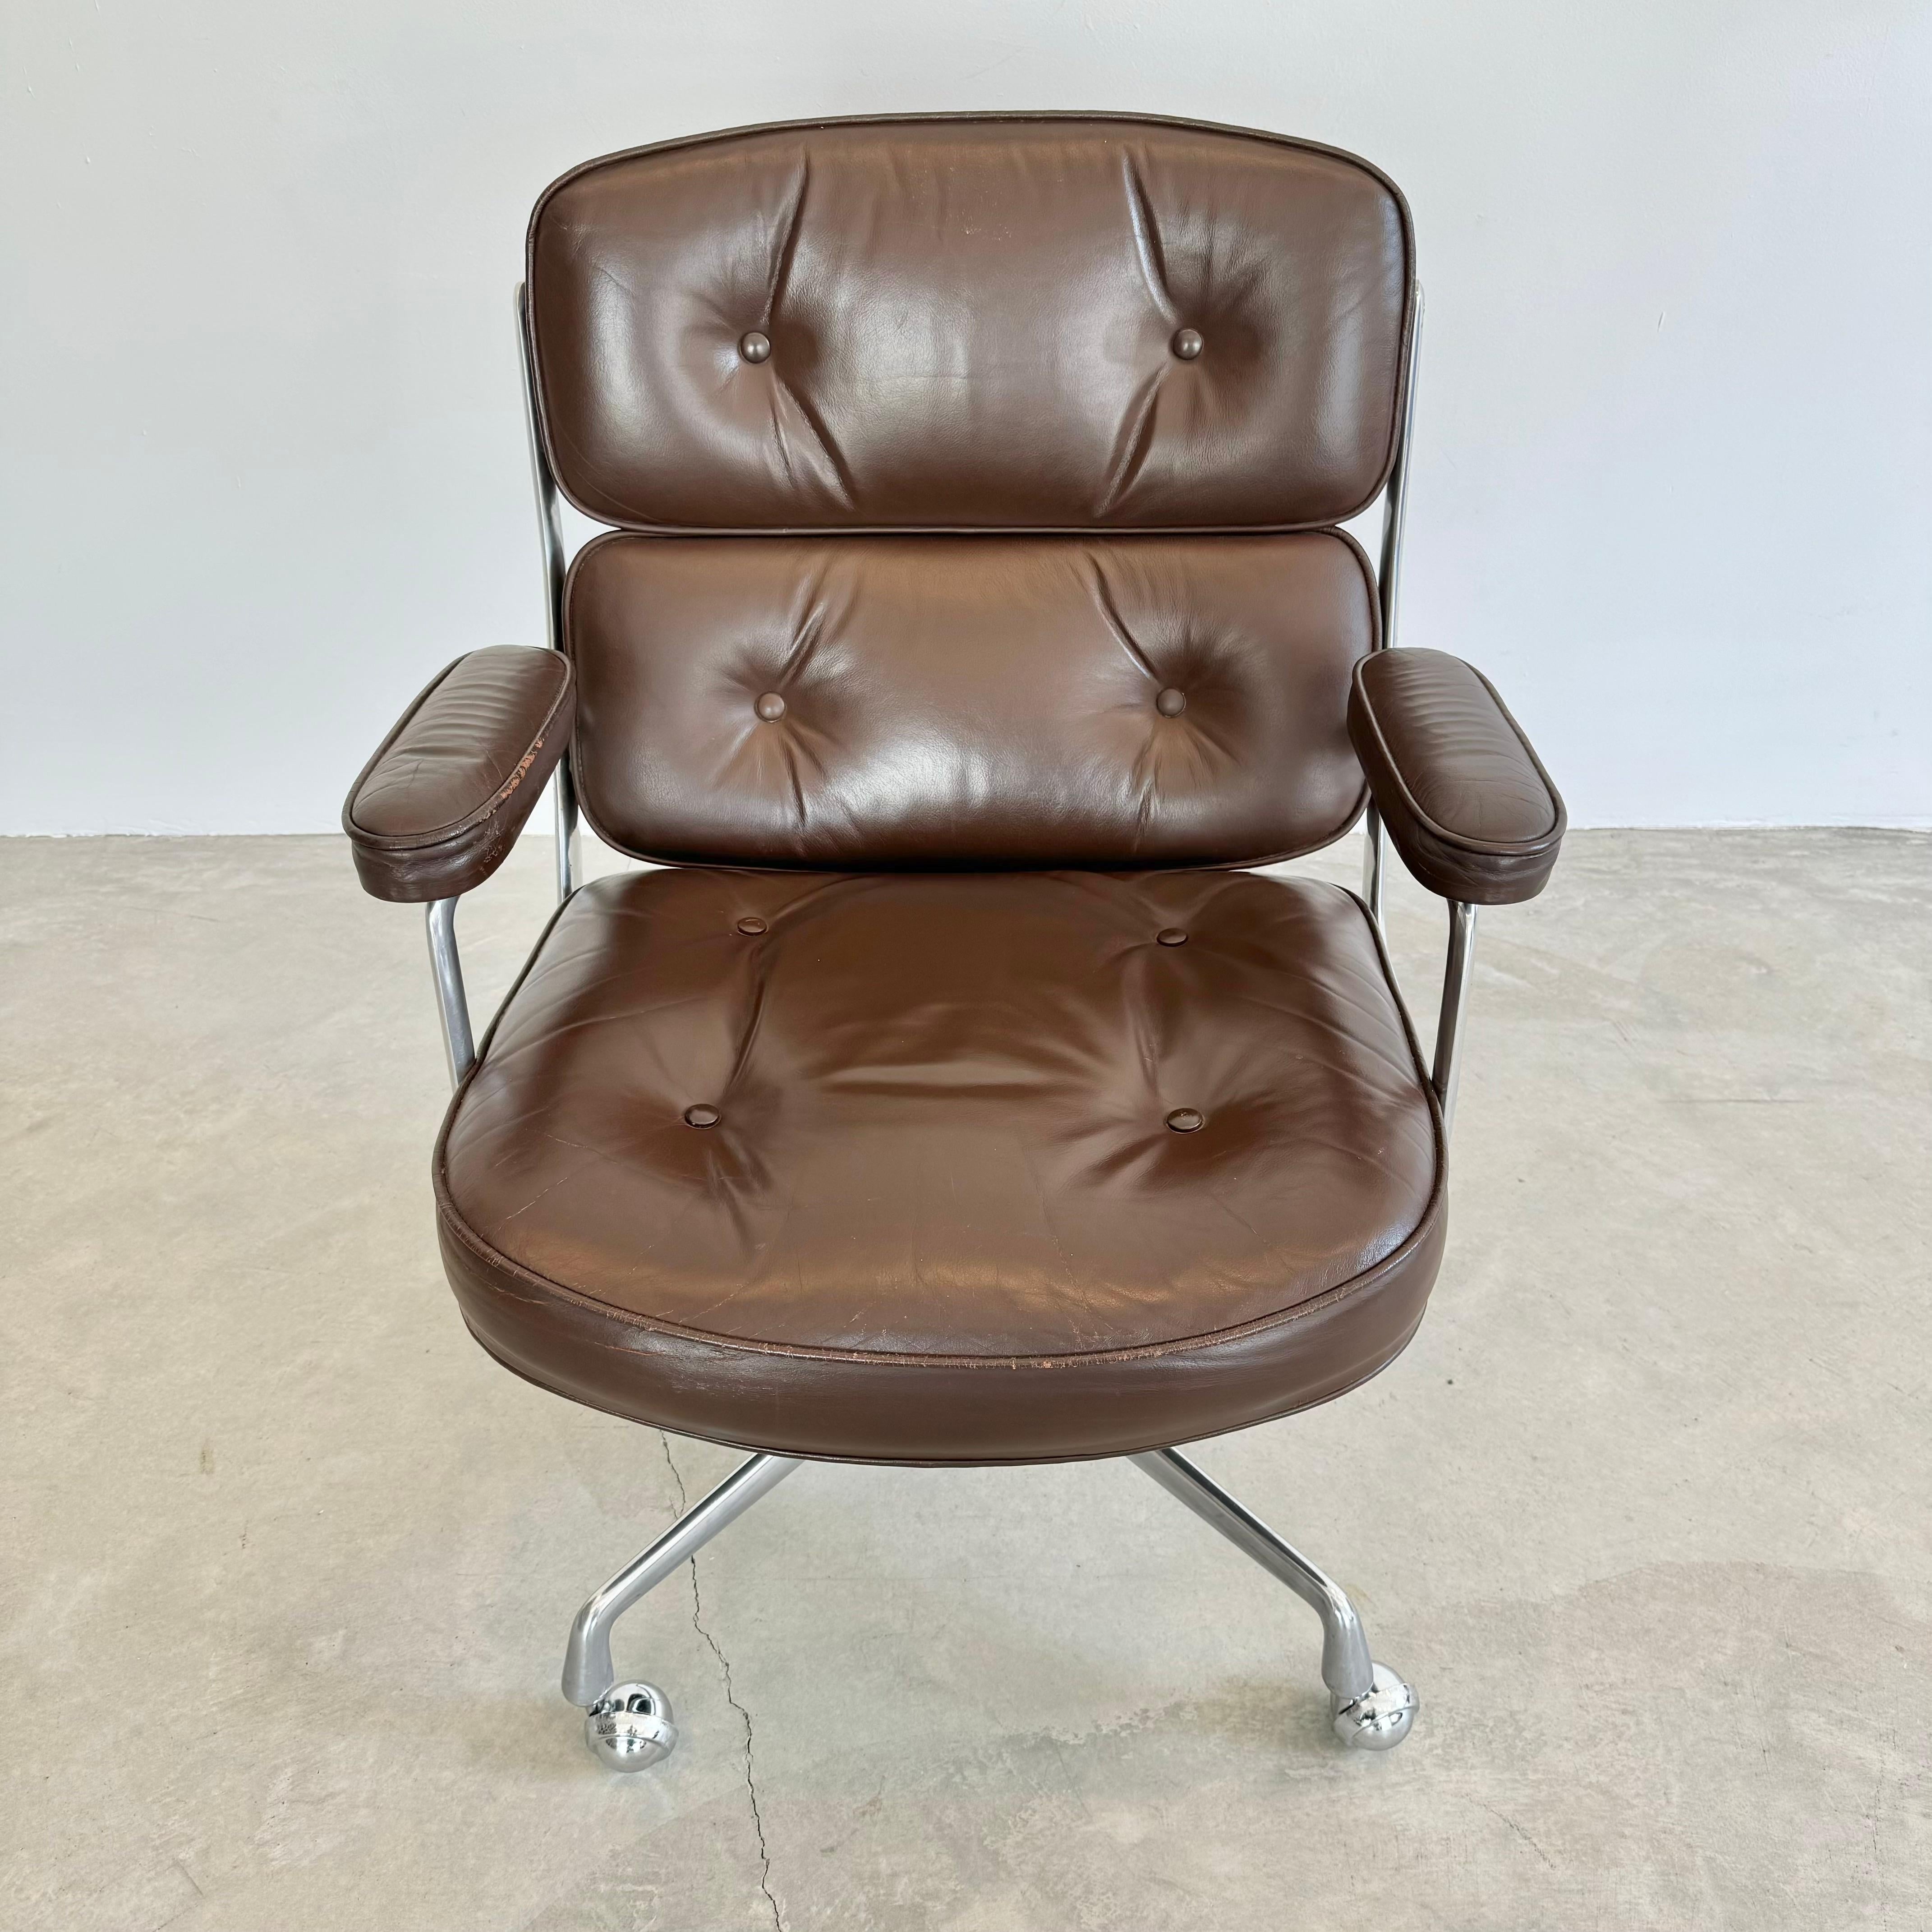 Classic Eames Time Life swivel chair in chocolate brown leather for Herman Miller. Original black leather with only slight wear as shown. Metal in good condition. Extremely comfortable and worn in. Chair swivels. Chair reclines. Height is